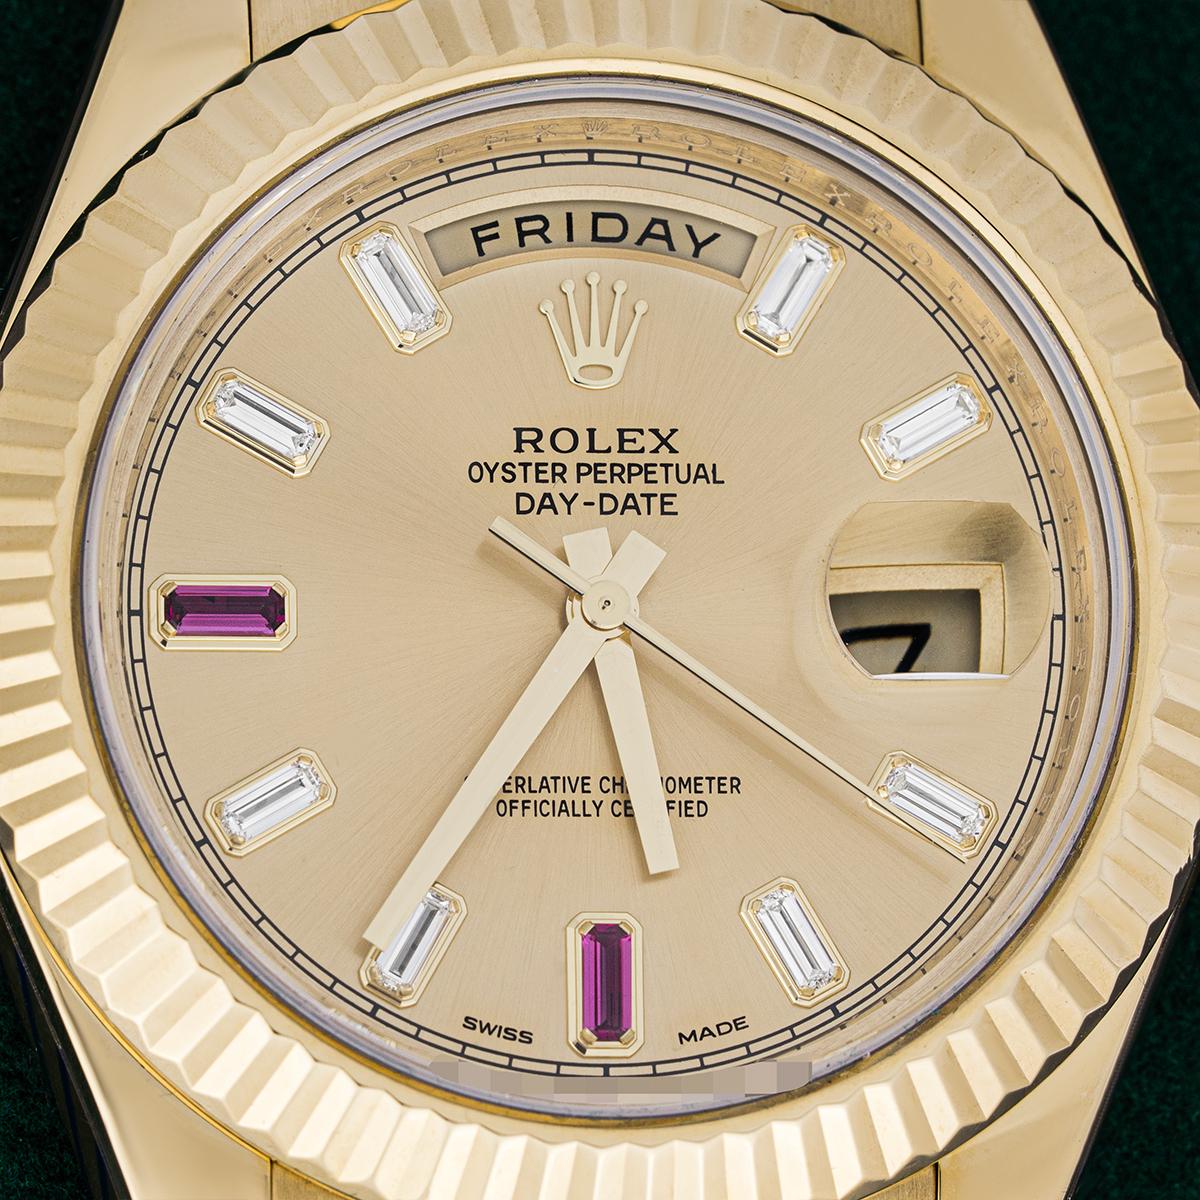 A yellow gold 41mm Day-Date II by Rolex. Featuring a champagne dial set with 8 baguette cut diamonds and 2 baguette cut rubies. The fluted bezel, president bracelet and concealed Crownclasp are signature characteristics of a Day-Date. Fitted with a